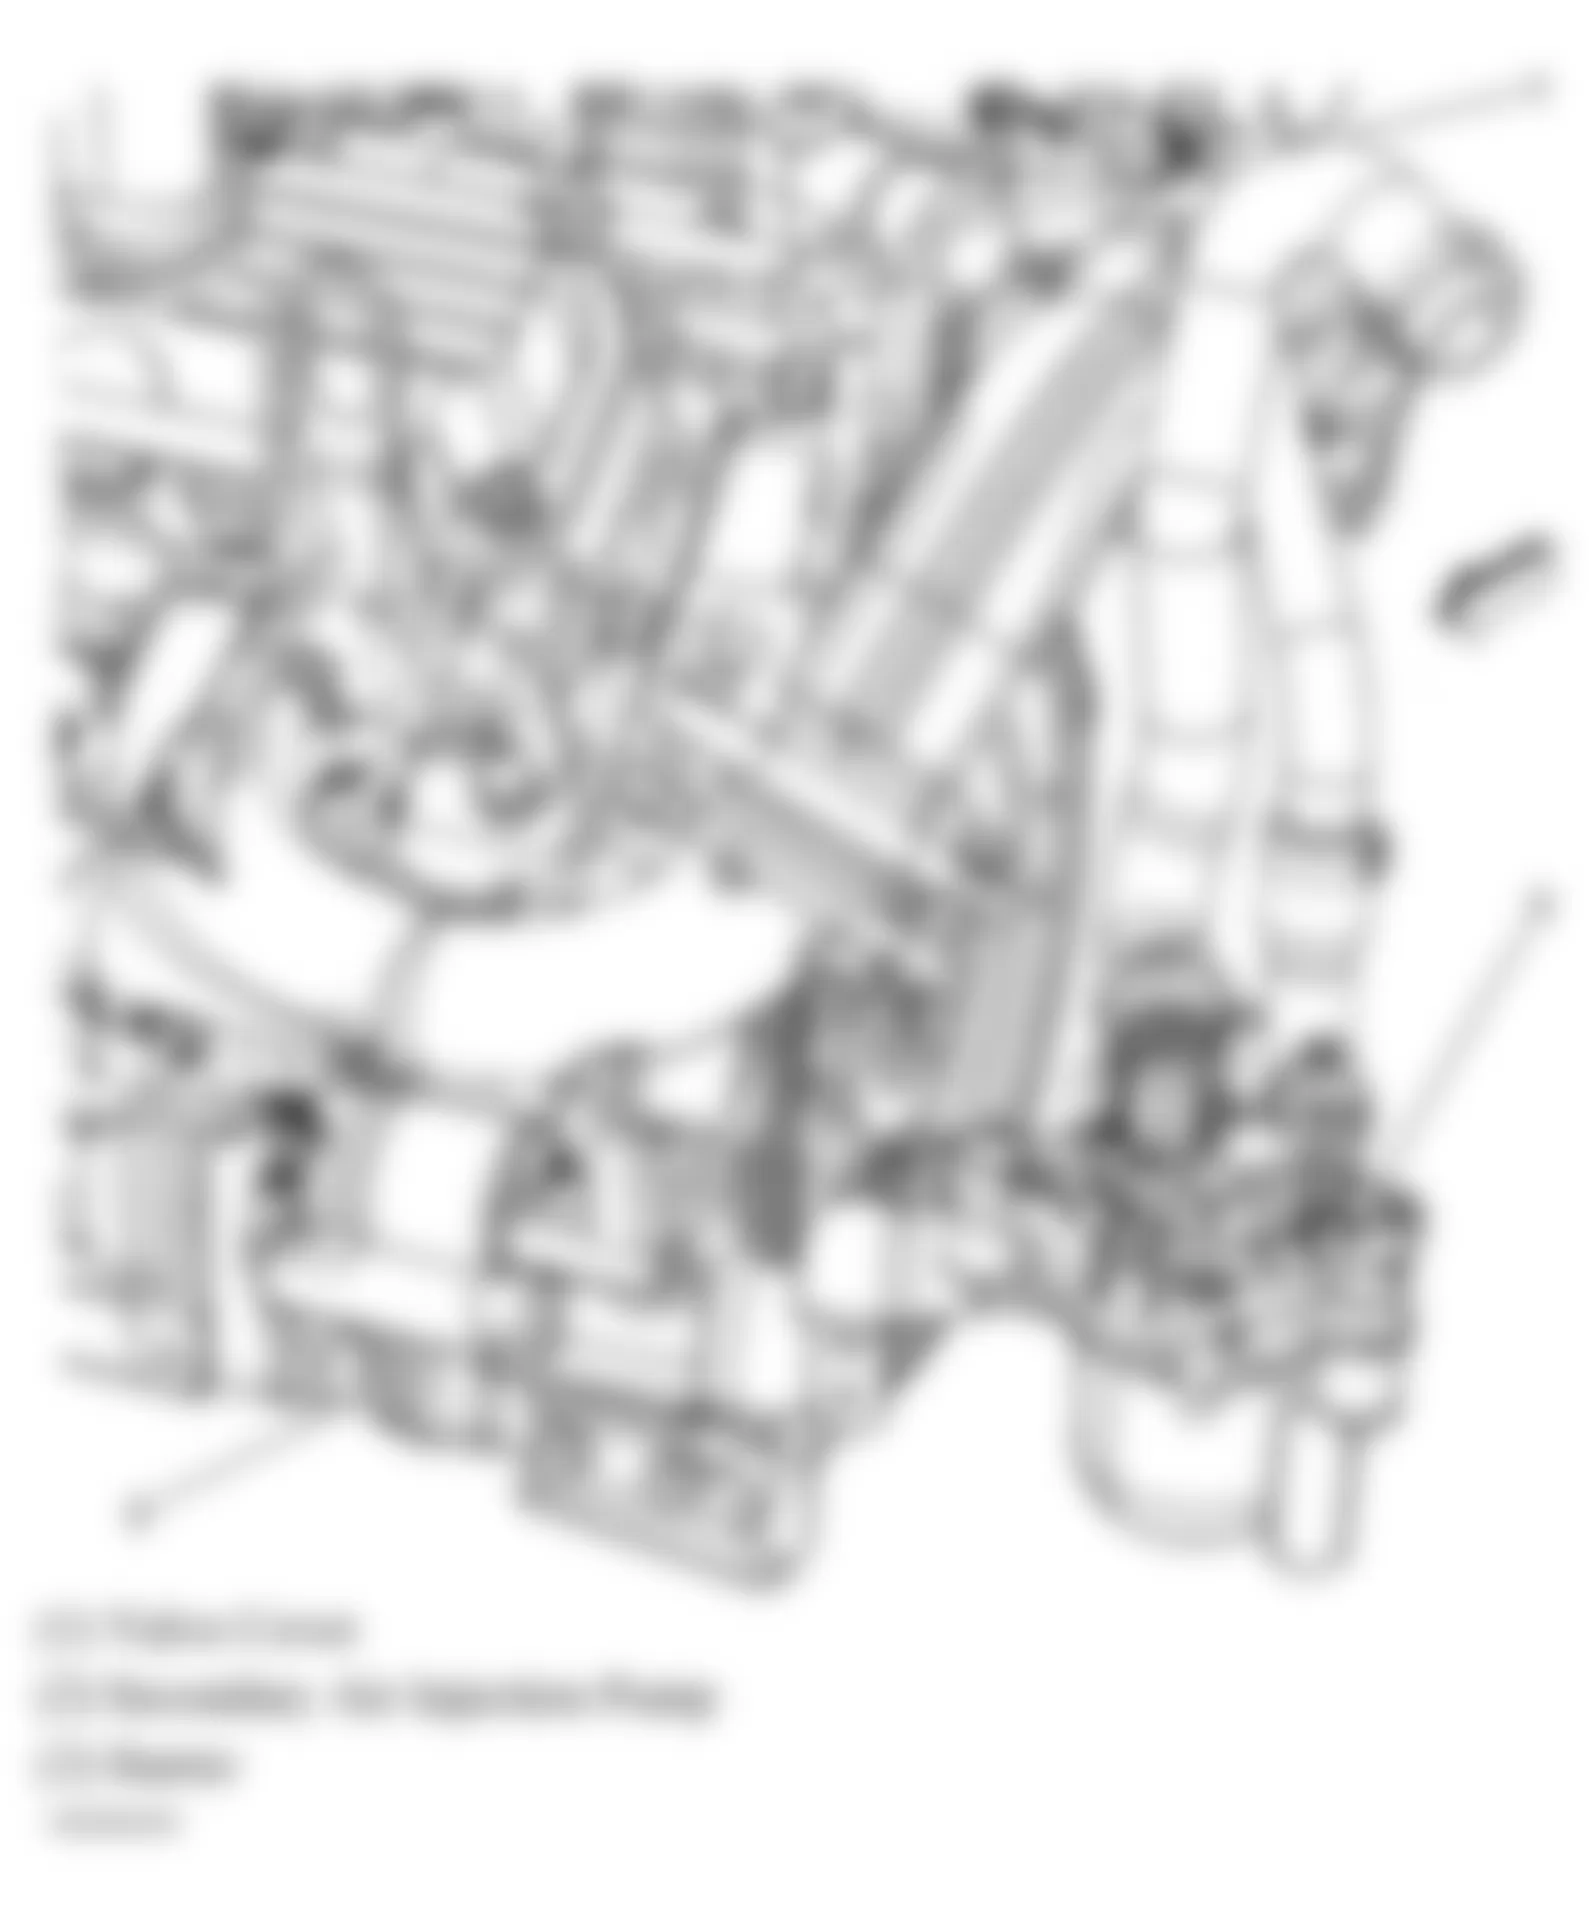 Buick Allure CXS 2006 - Component Locations -  Left Rear Of Engine (3.8L)